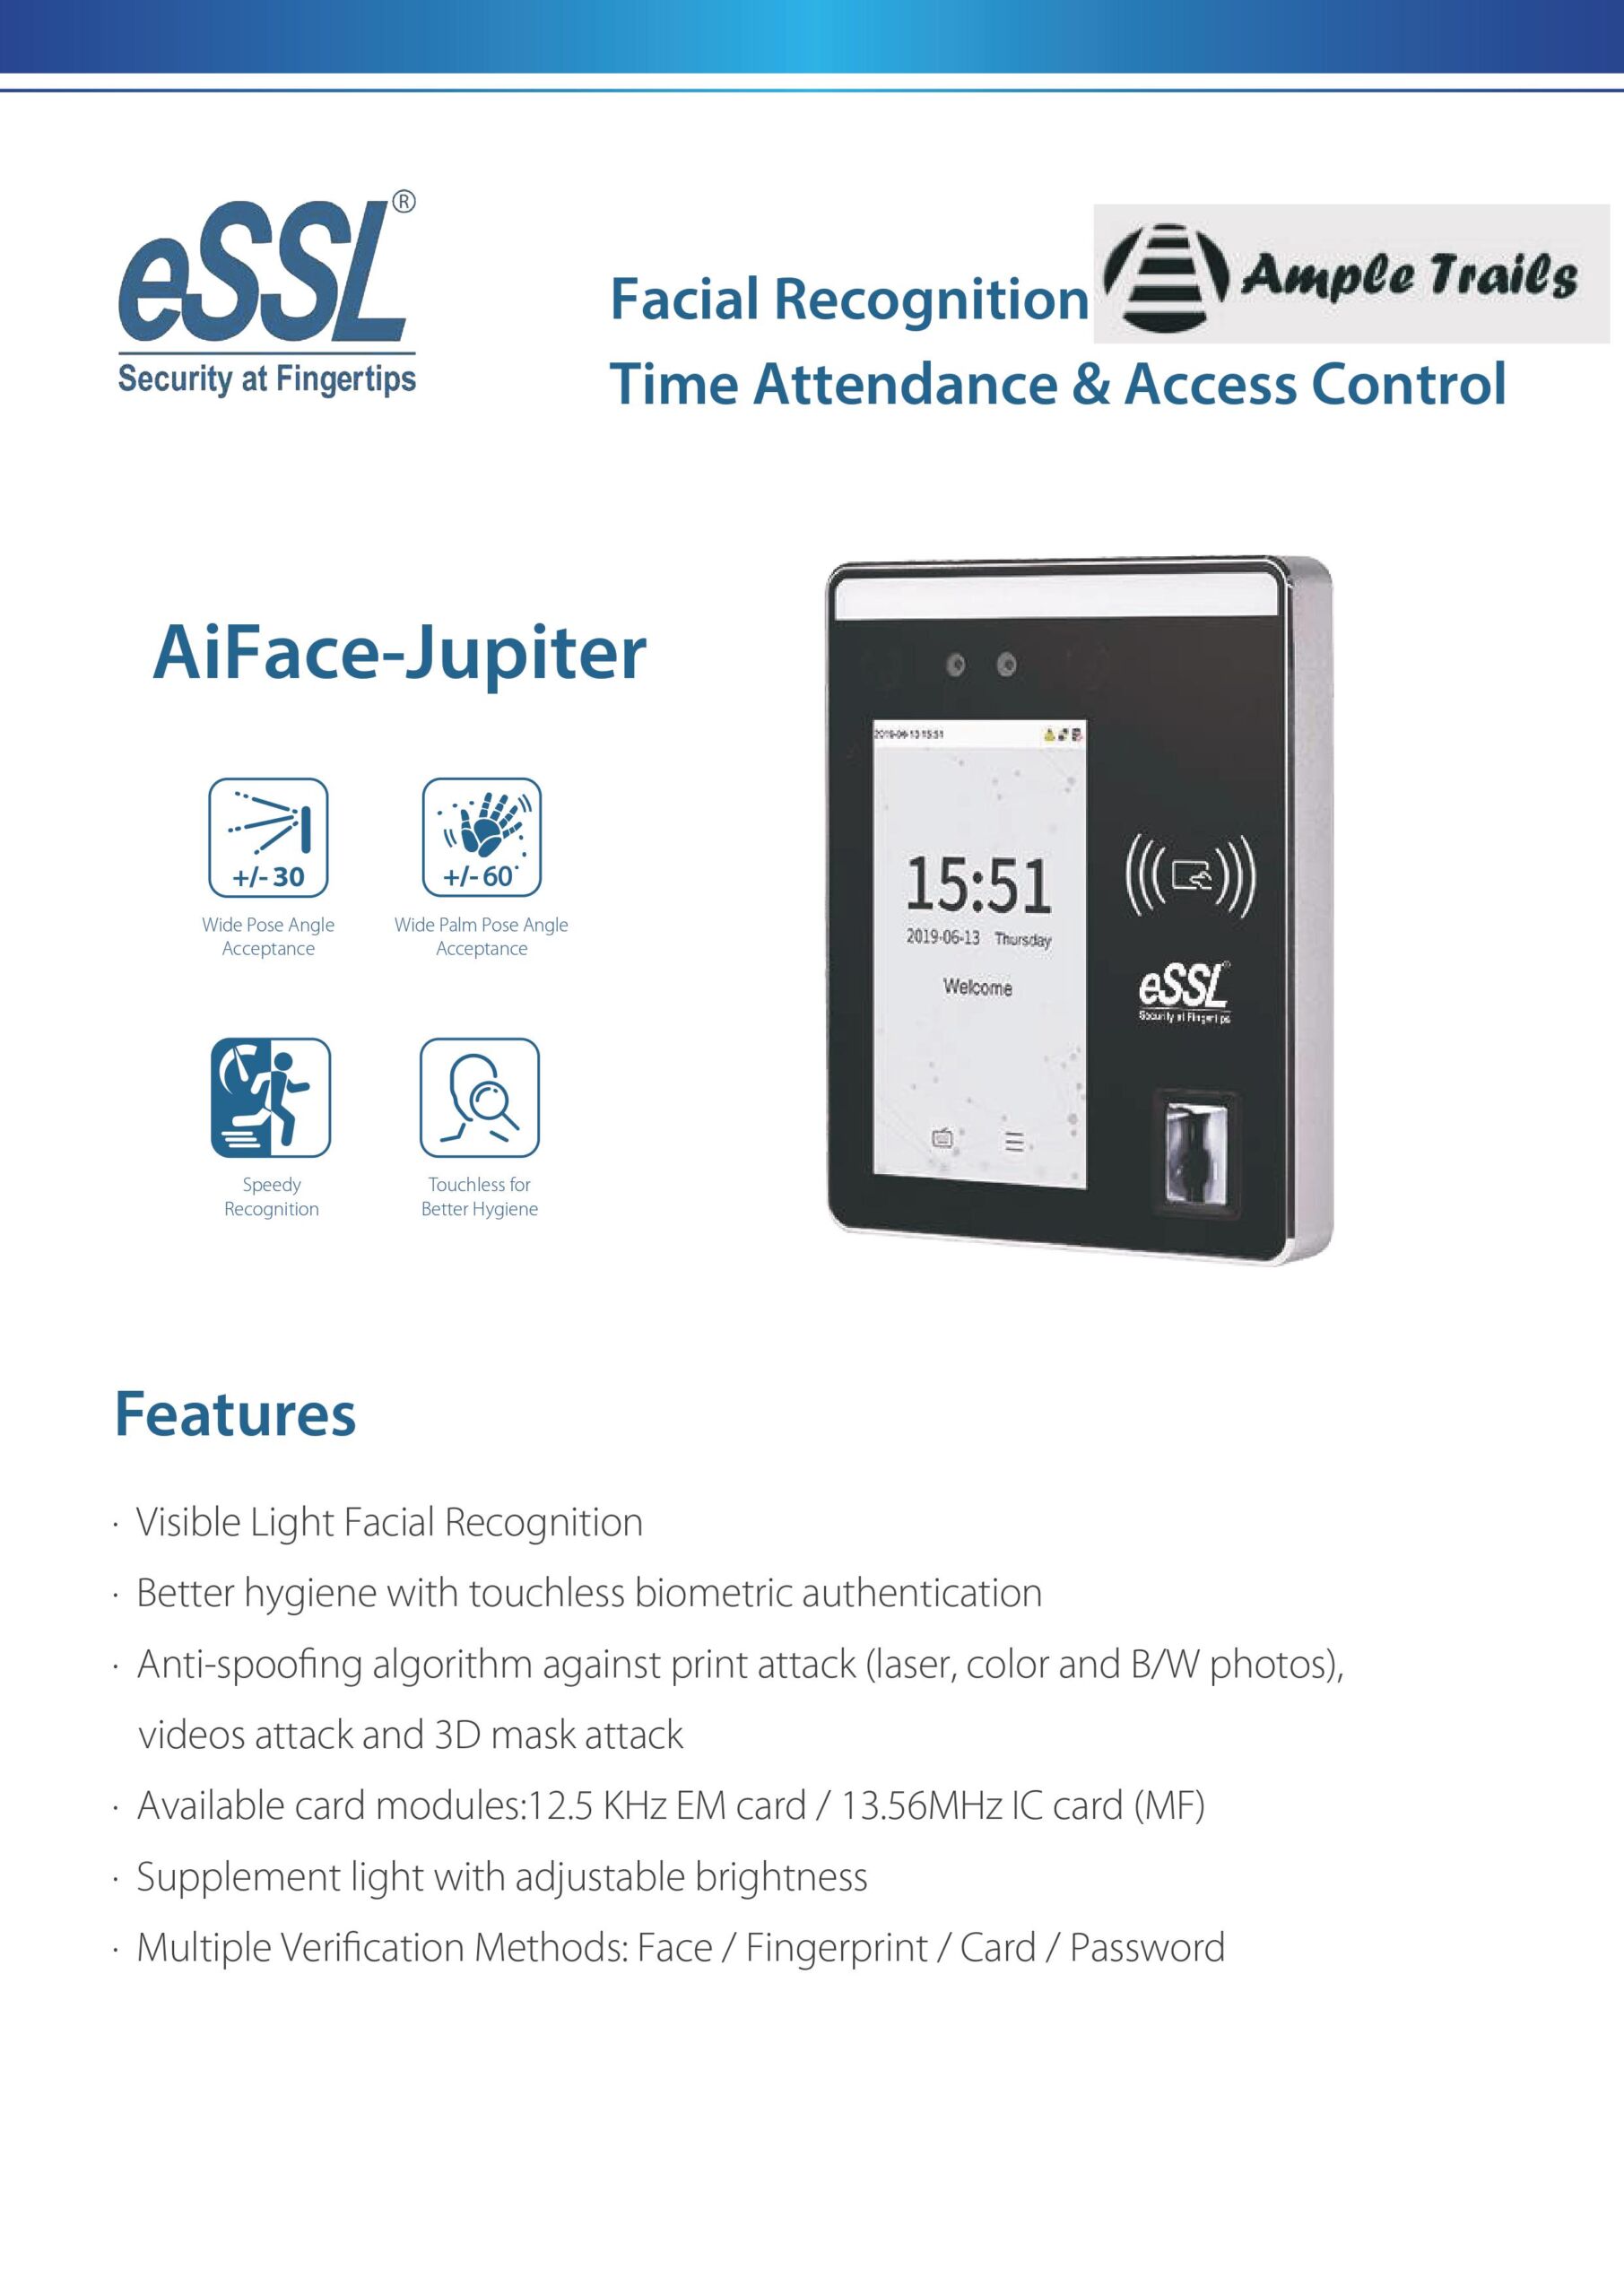 AiFace-Jupiter-Facial Recognition Time Attendance Access Control